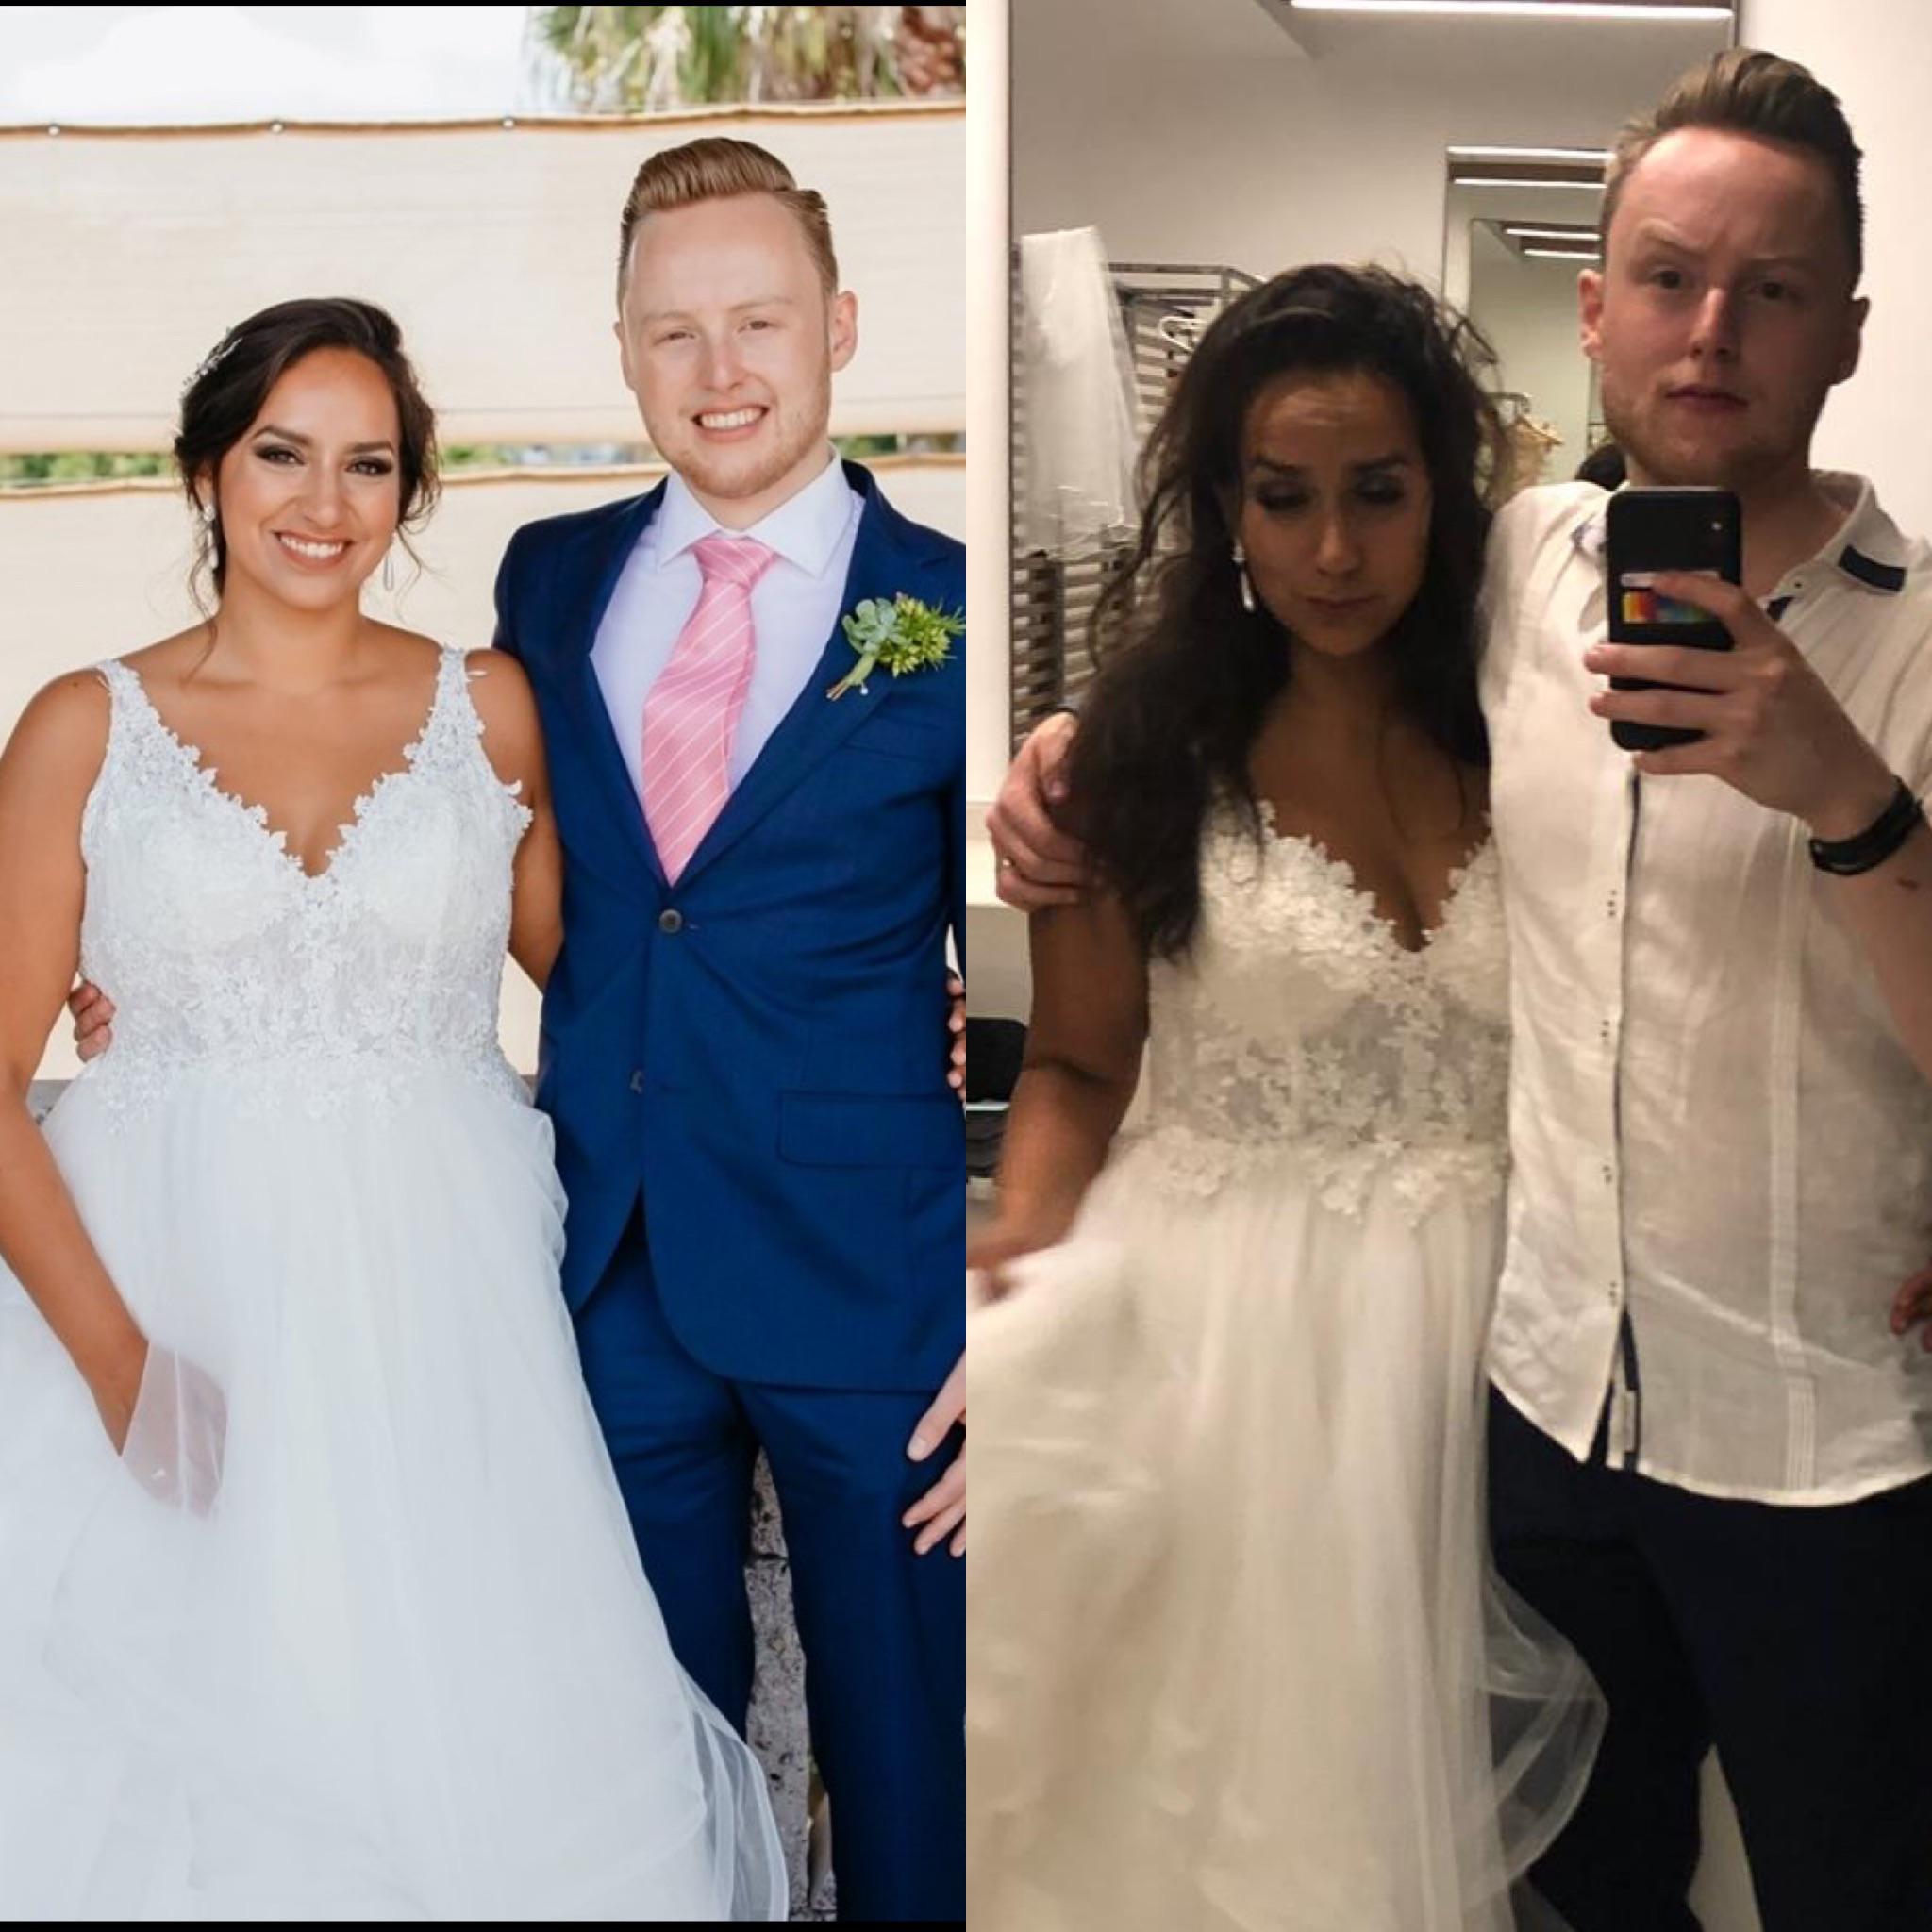 Before and after: the couple shared a hilarious photo of how exhausting can be the wedding day